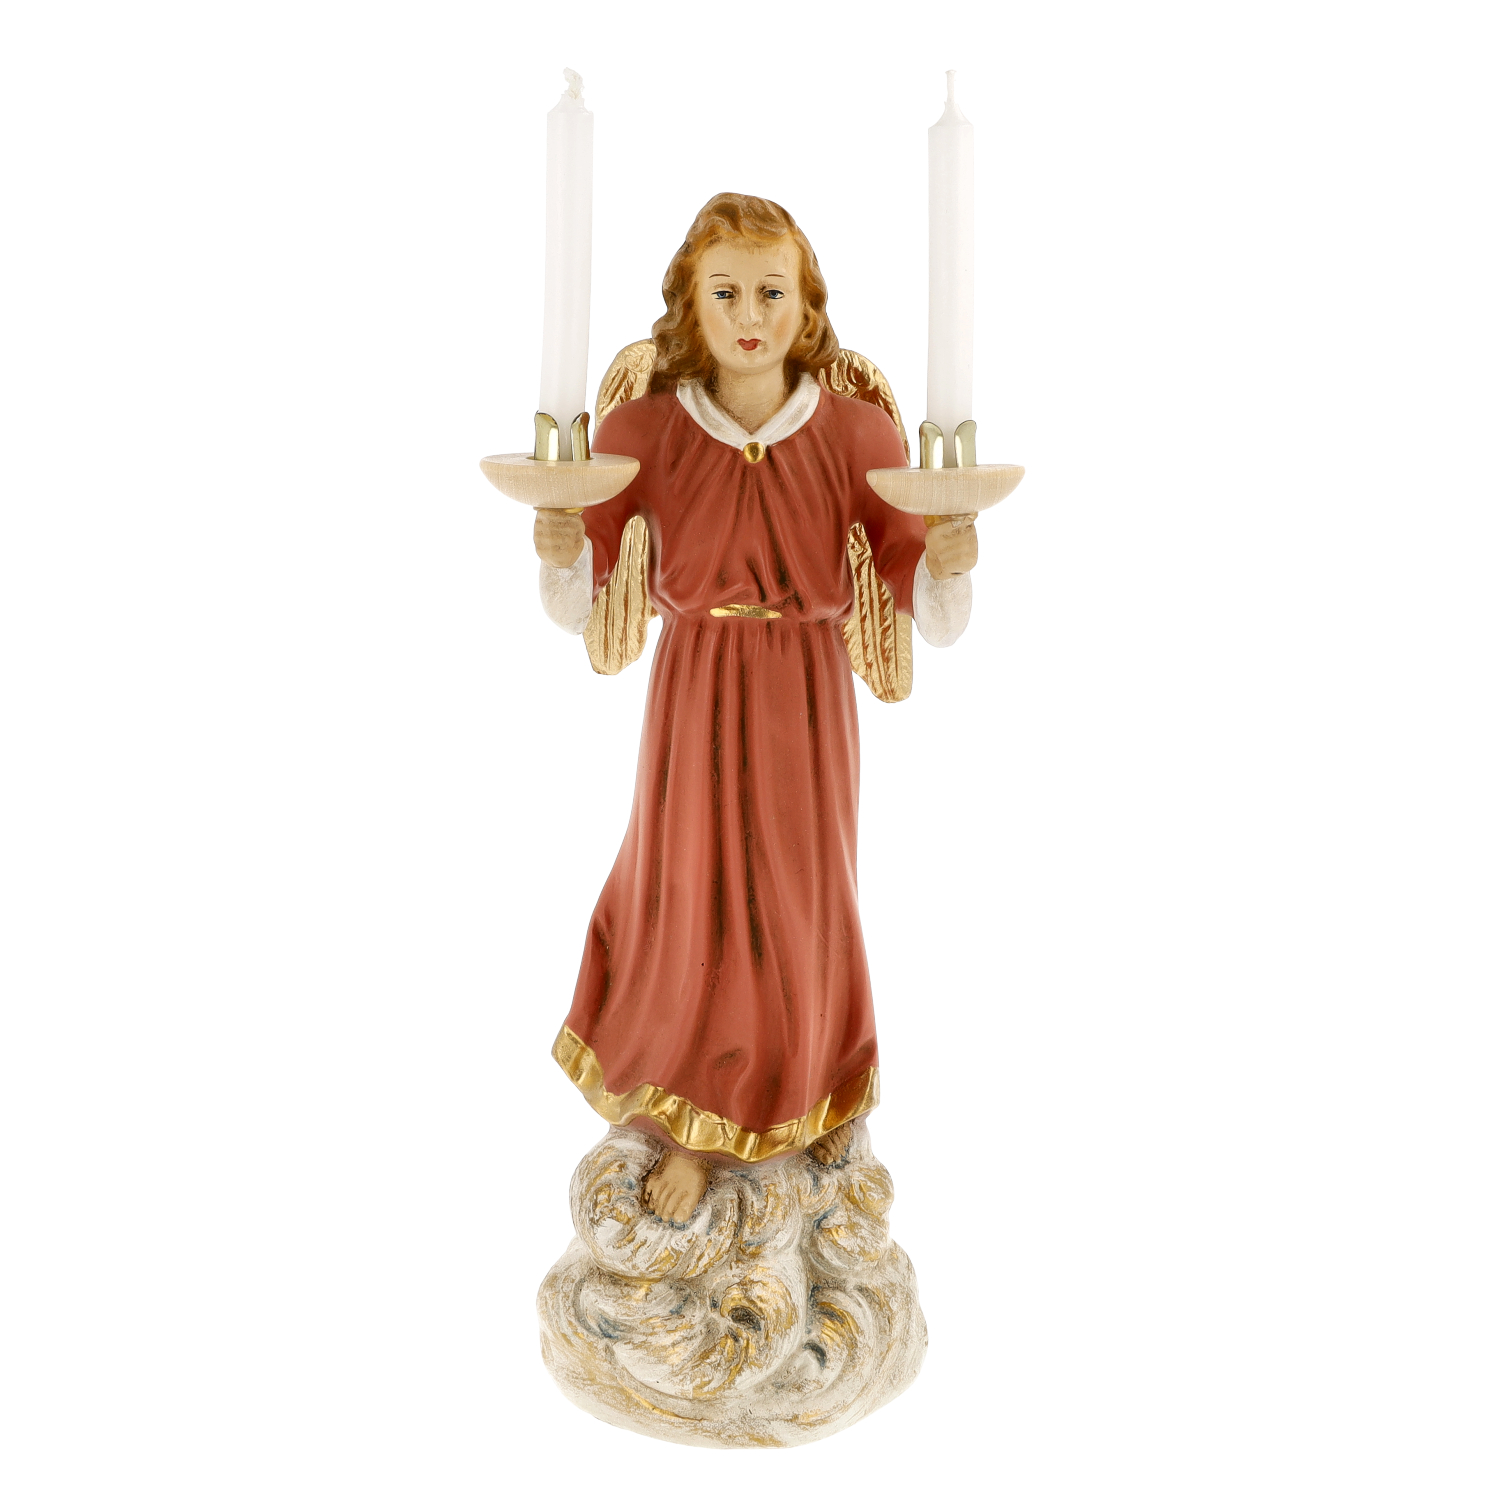 Angel with candles, rosé, small size